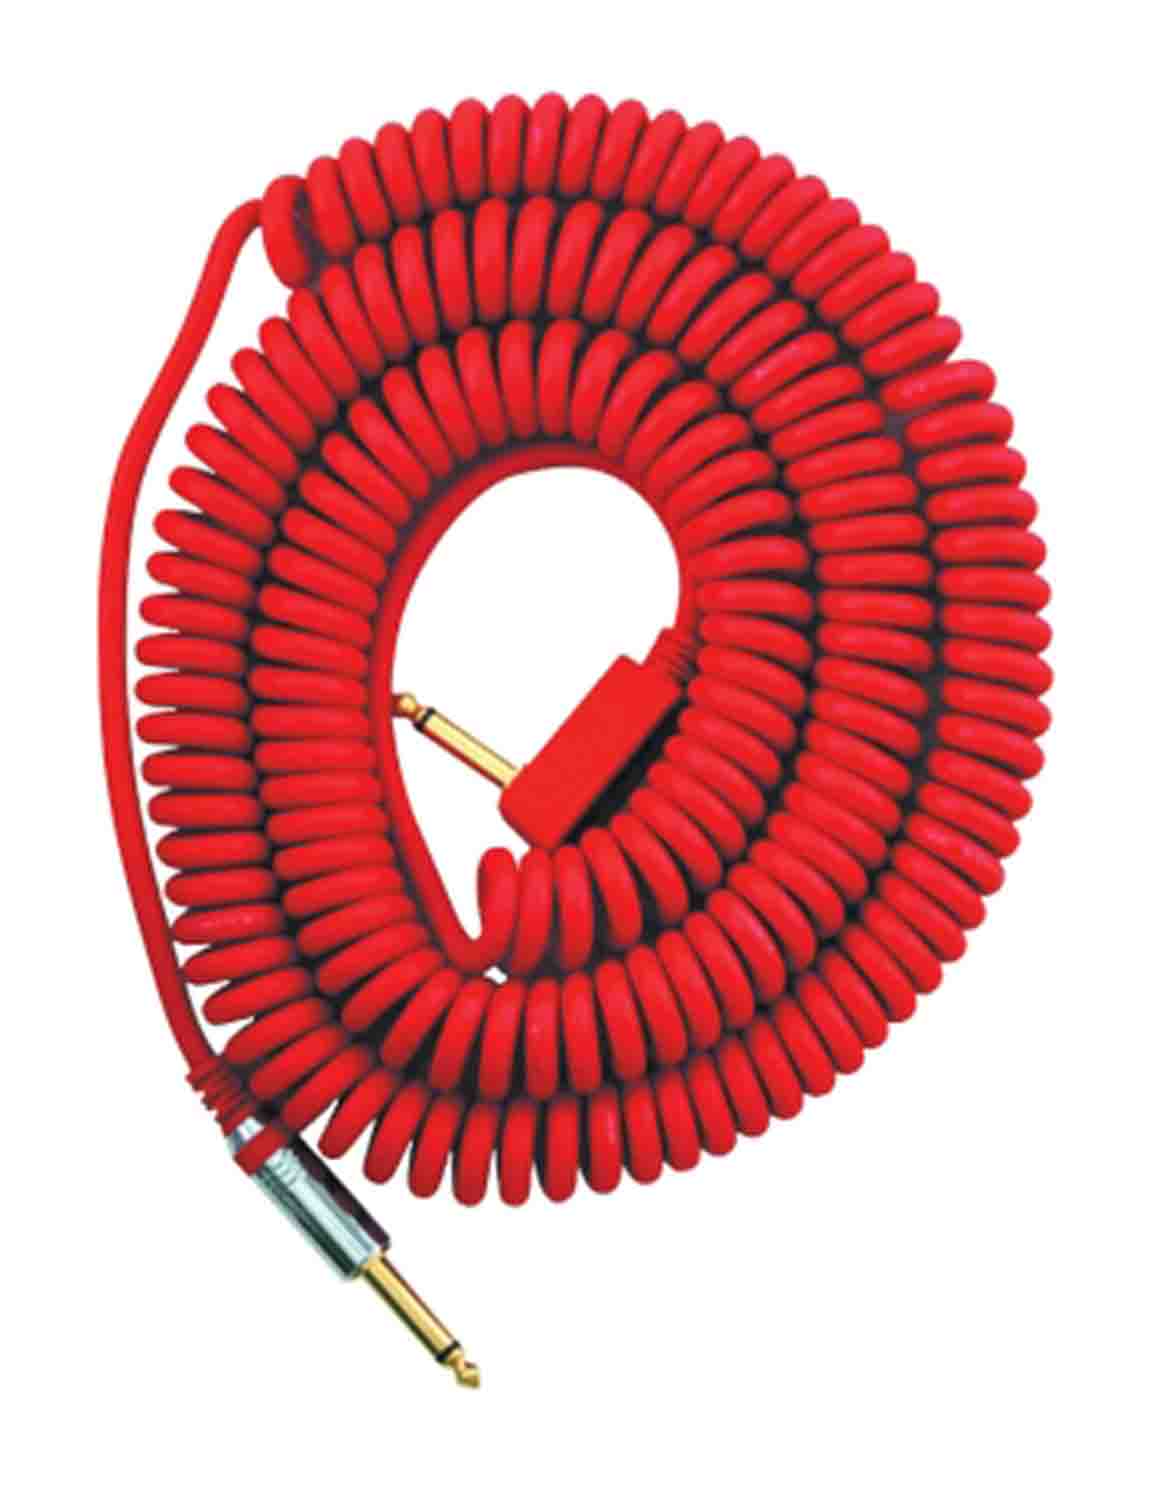 Korg Vintage Coiled Guitar Cable High-Quality 29.5' Cable with Mesh Bag - Red - Hollywood DJ